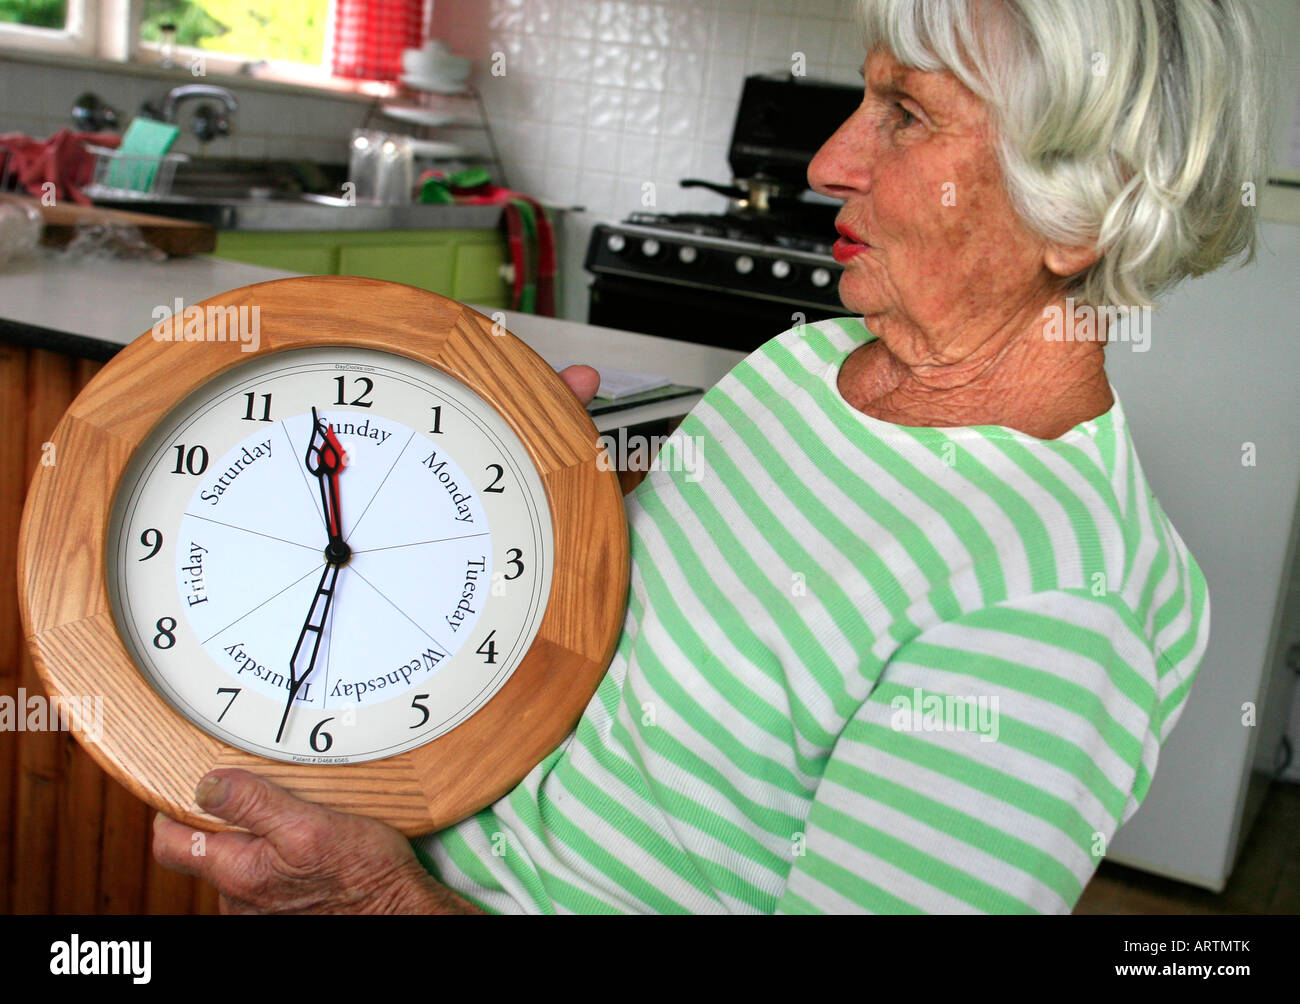 An older woman with some memory loss holds a clock that shows the day of the week as well as the time of day Stock Photo